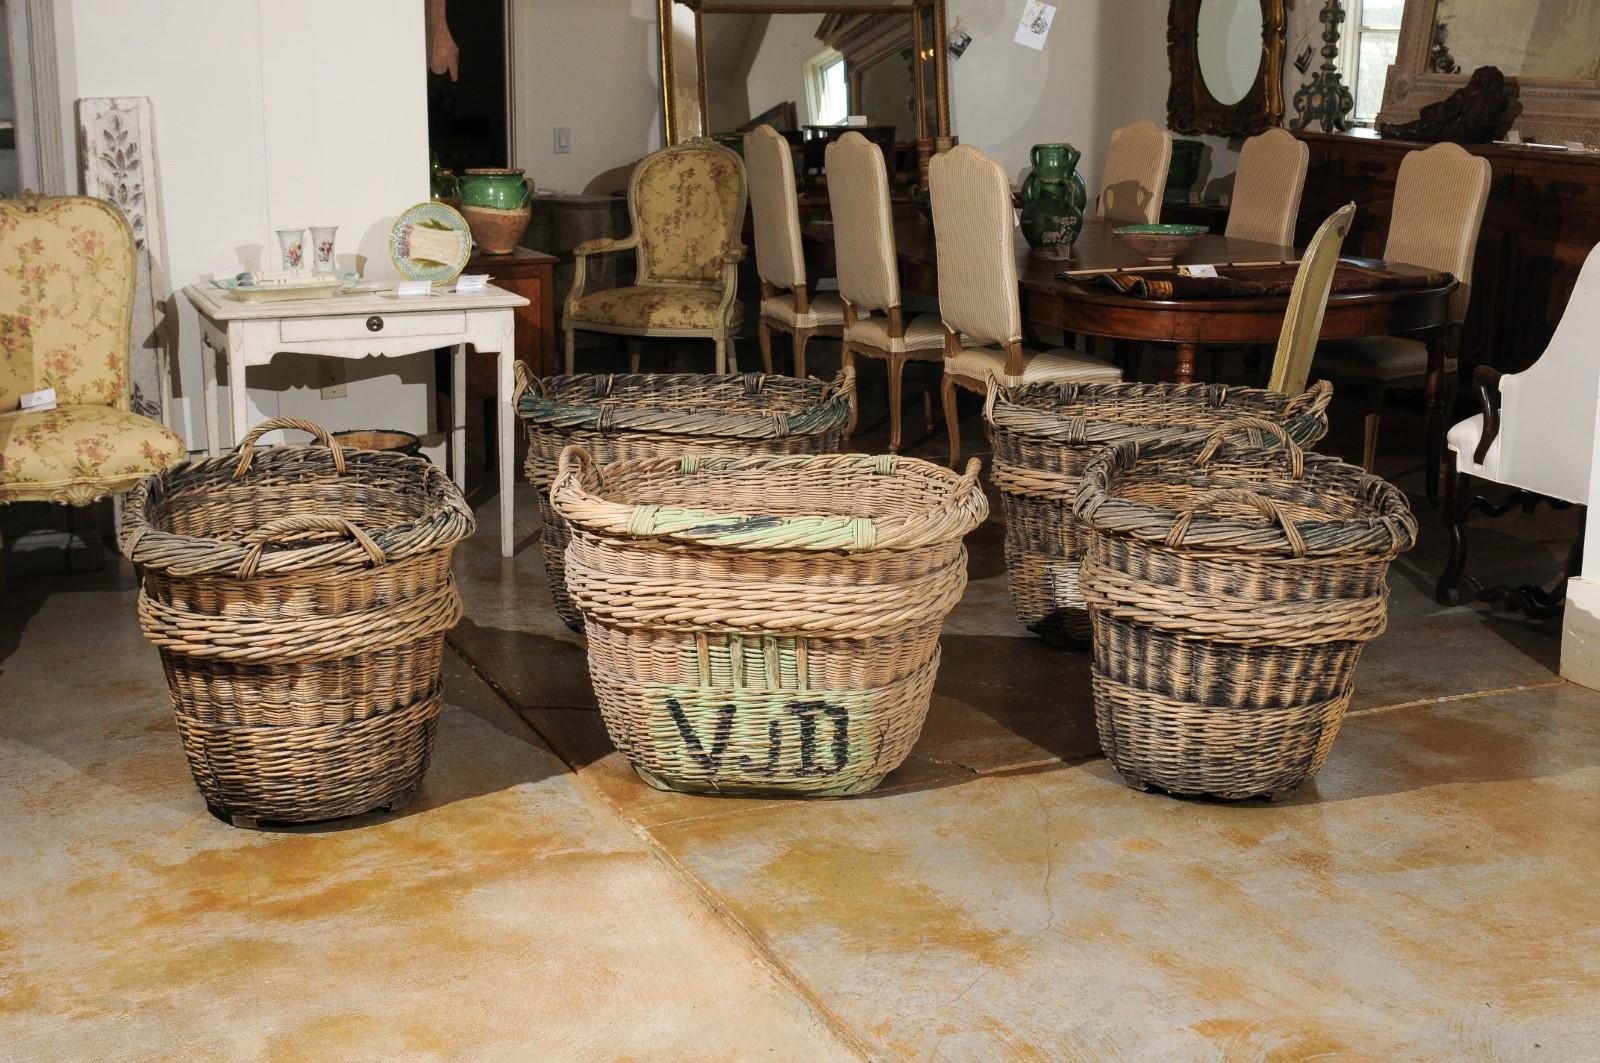 20th Century Large French Wicker Basket circa 1900 with Weathered Appearance 'One Left'